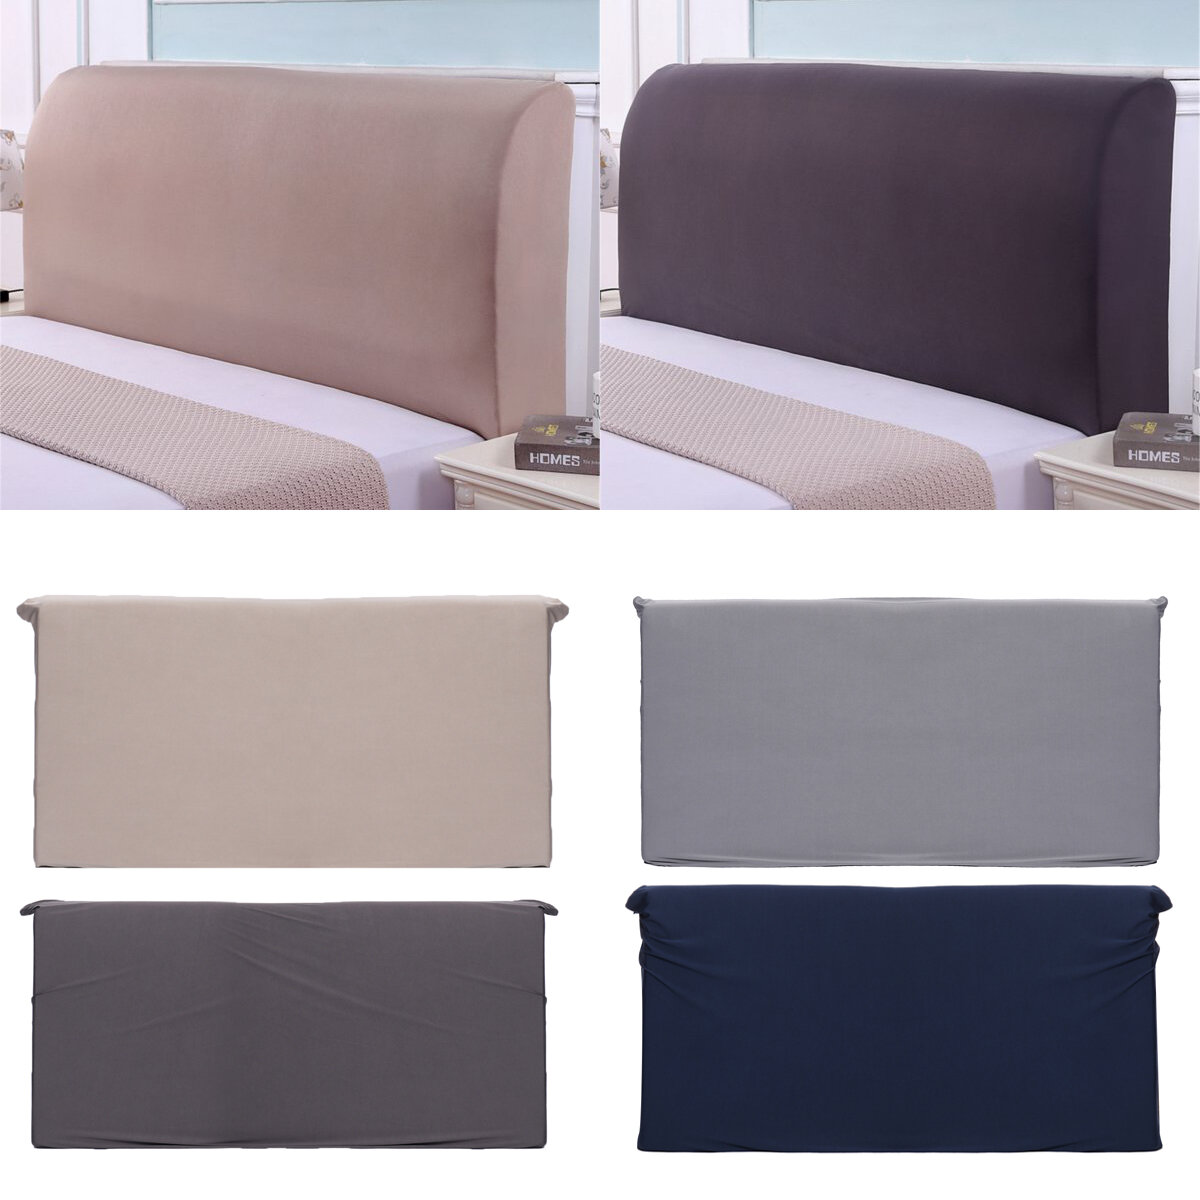 150CM Polyester Elastic Bed Headboard Cover Full Dustproof Protector Slipcover Bed Protection Dust Cover Bedspread